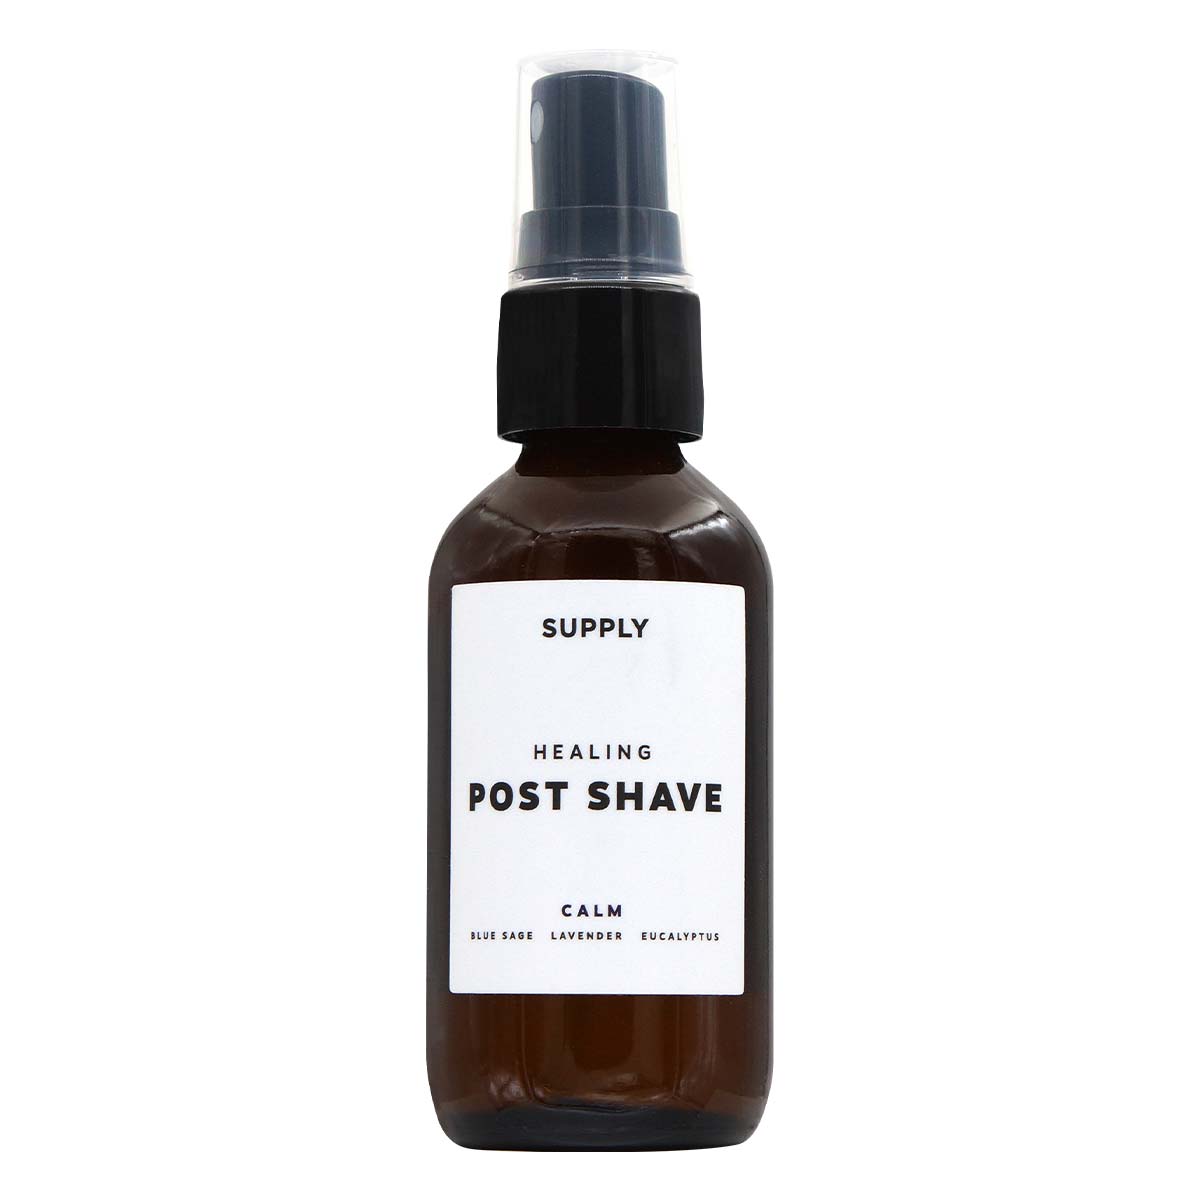 SUPPLY Healing Post Shave CALM 2 oz-p_2